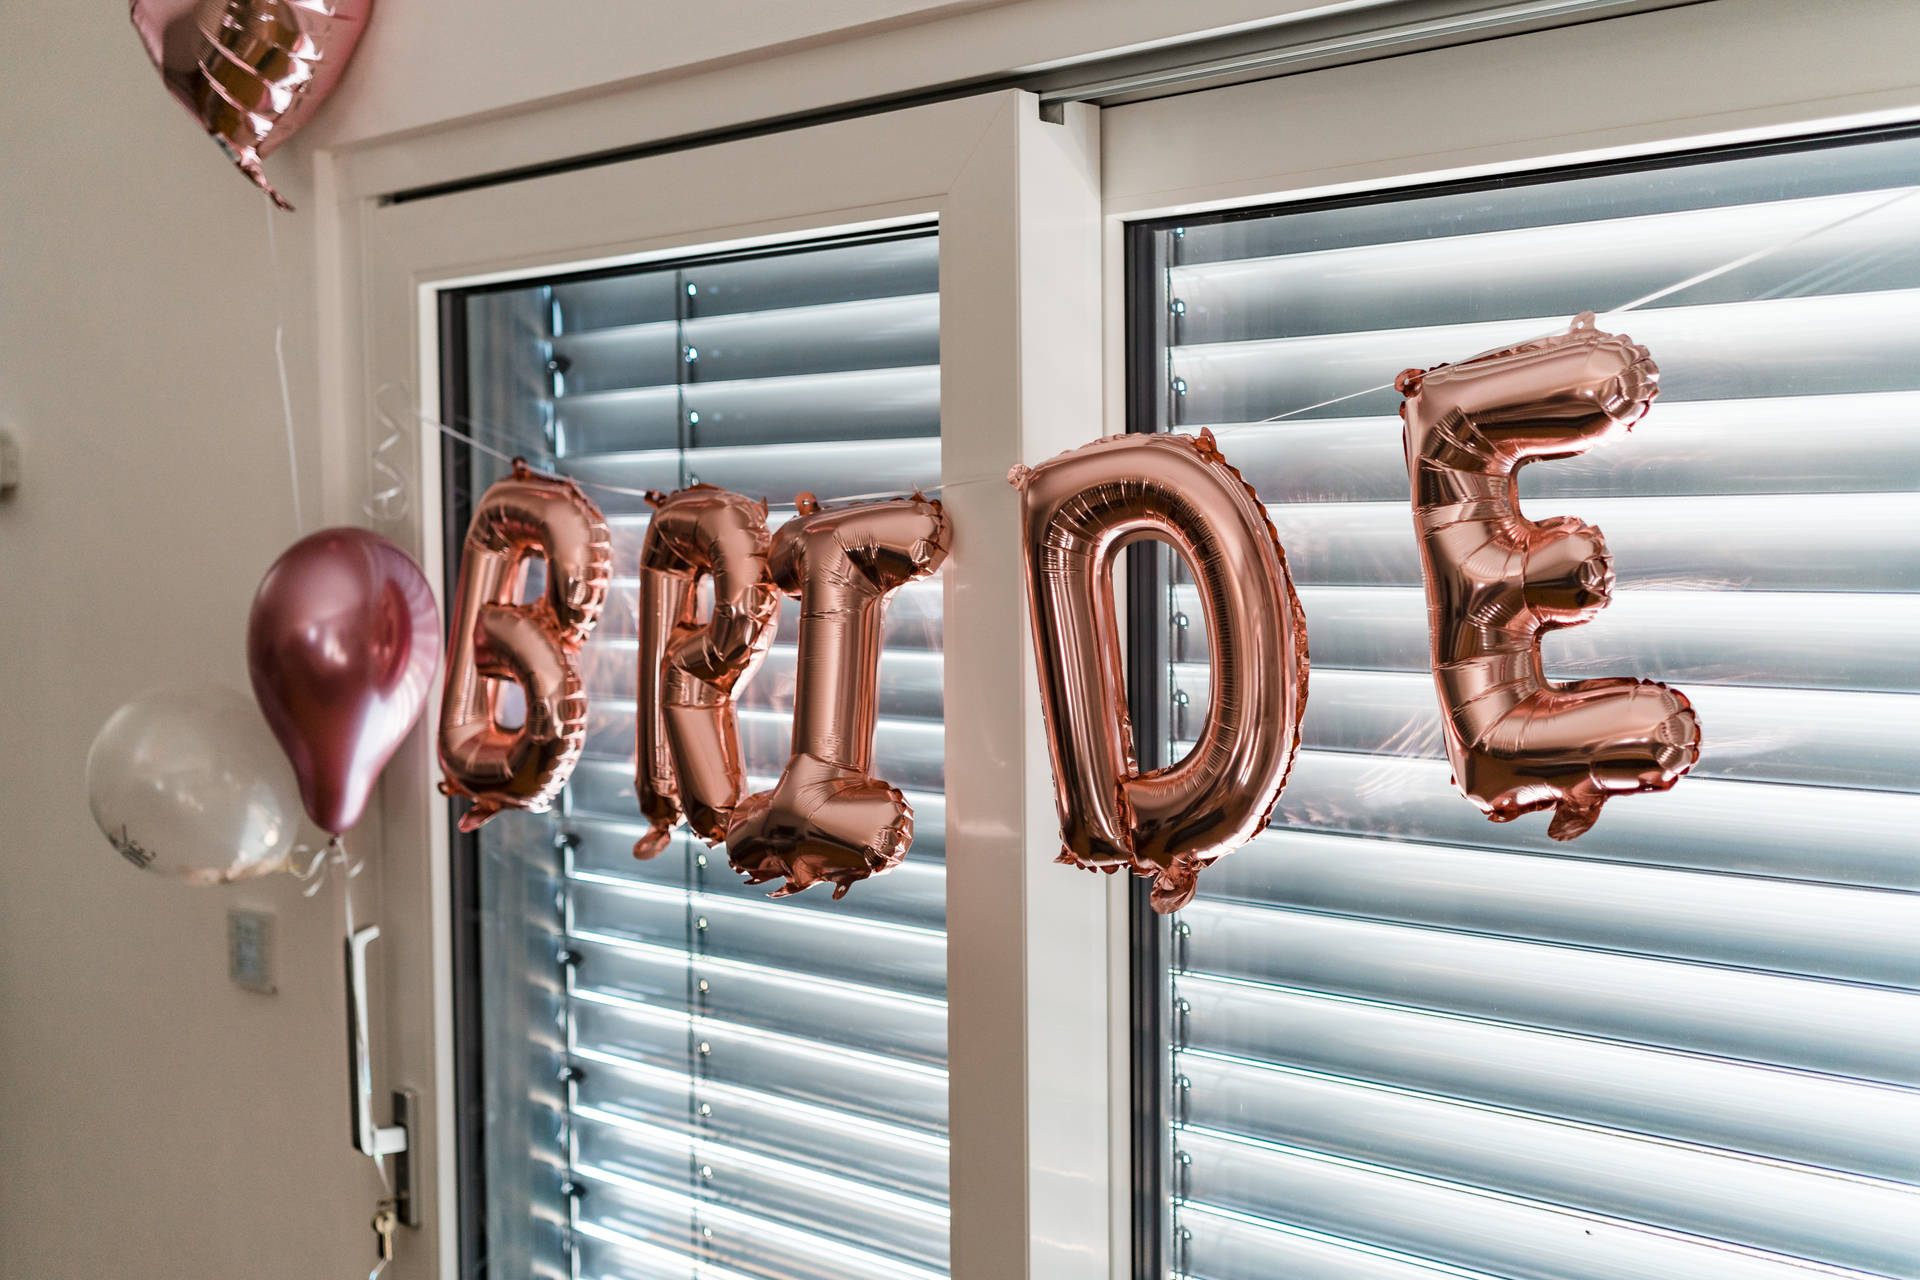 Bride Balloons At Bachelorette Party